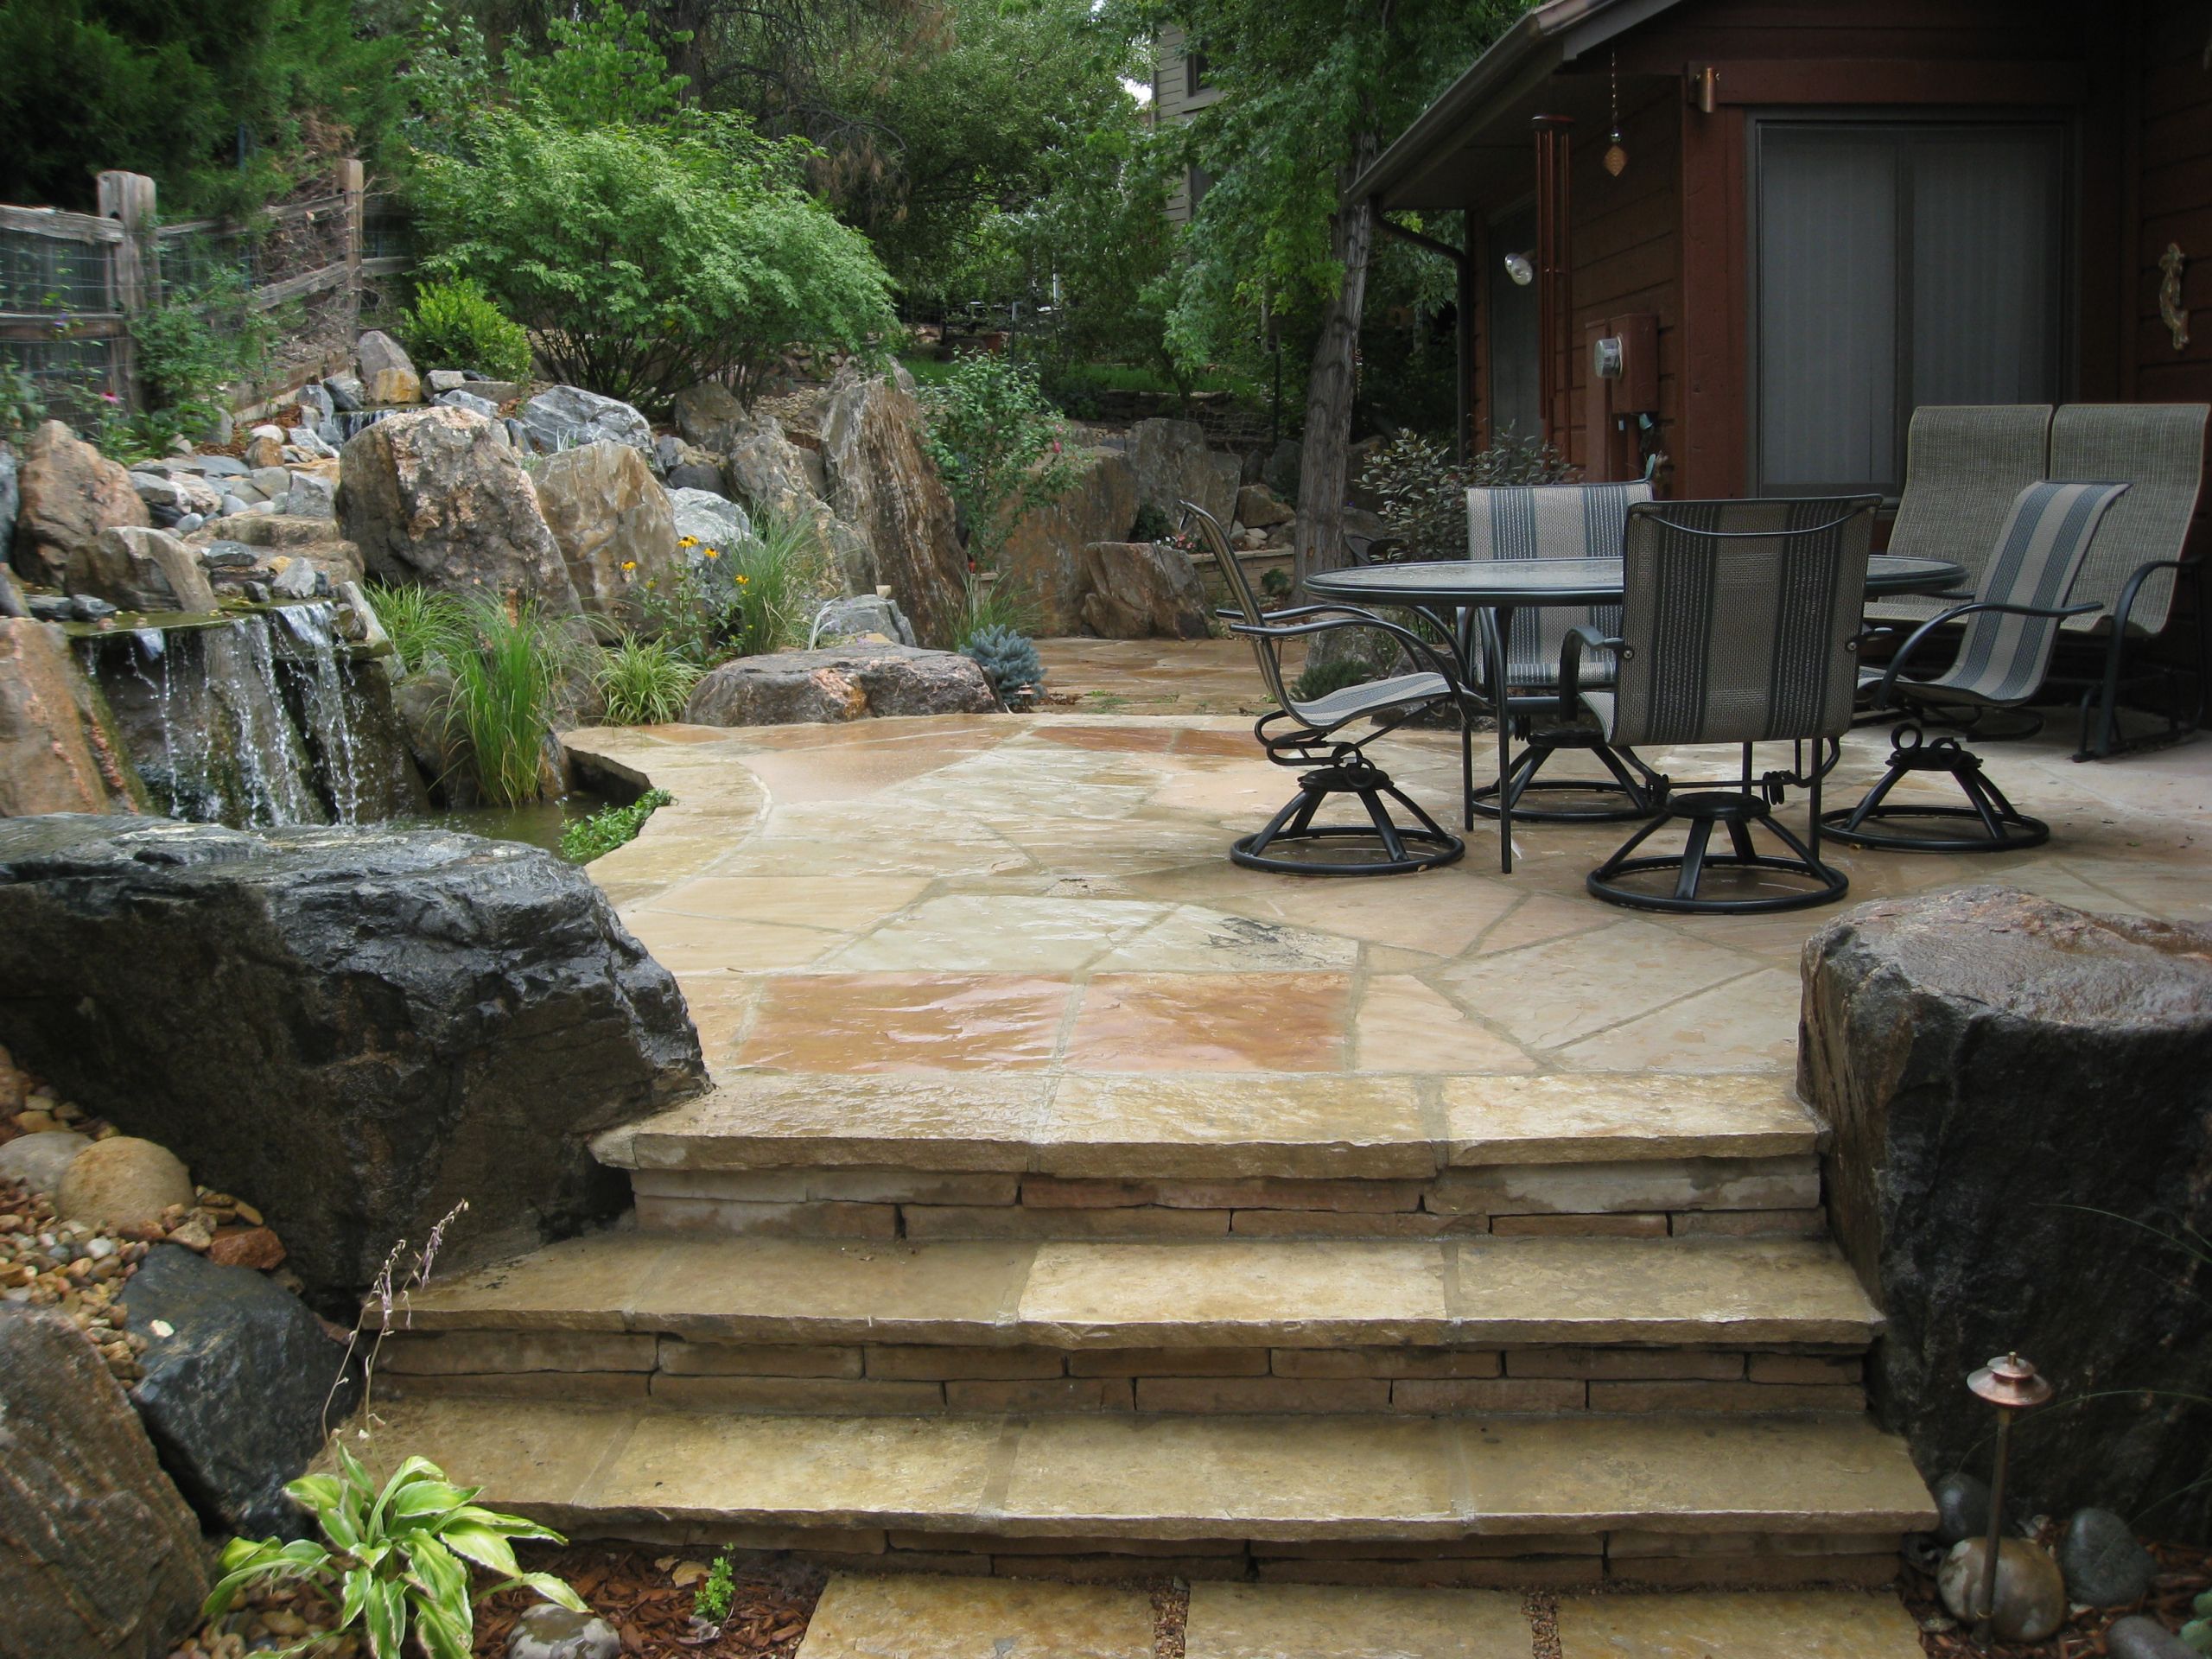 Terrace Landscape With Boulders
 Flagstone Patio and Stairs with Boulders and Naturalistic